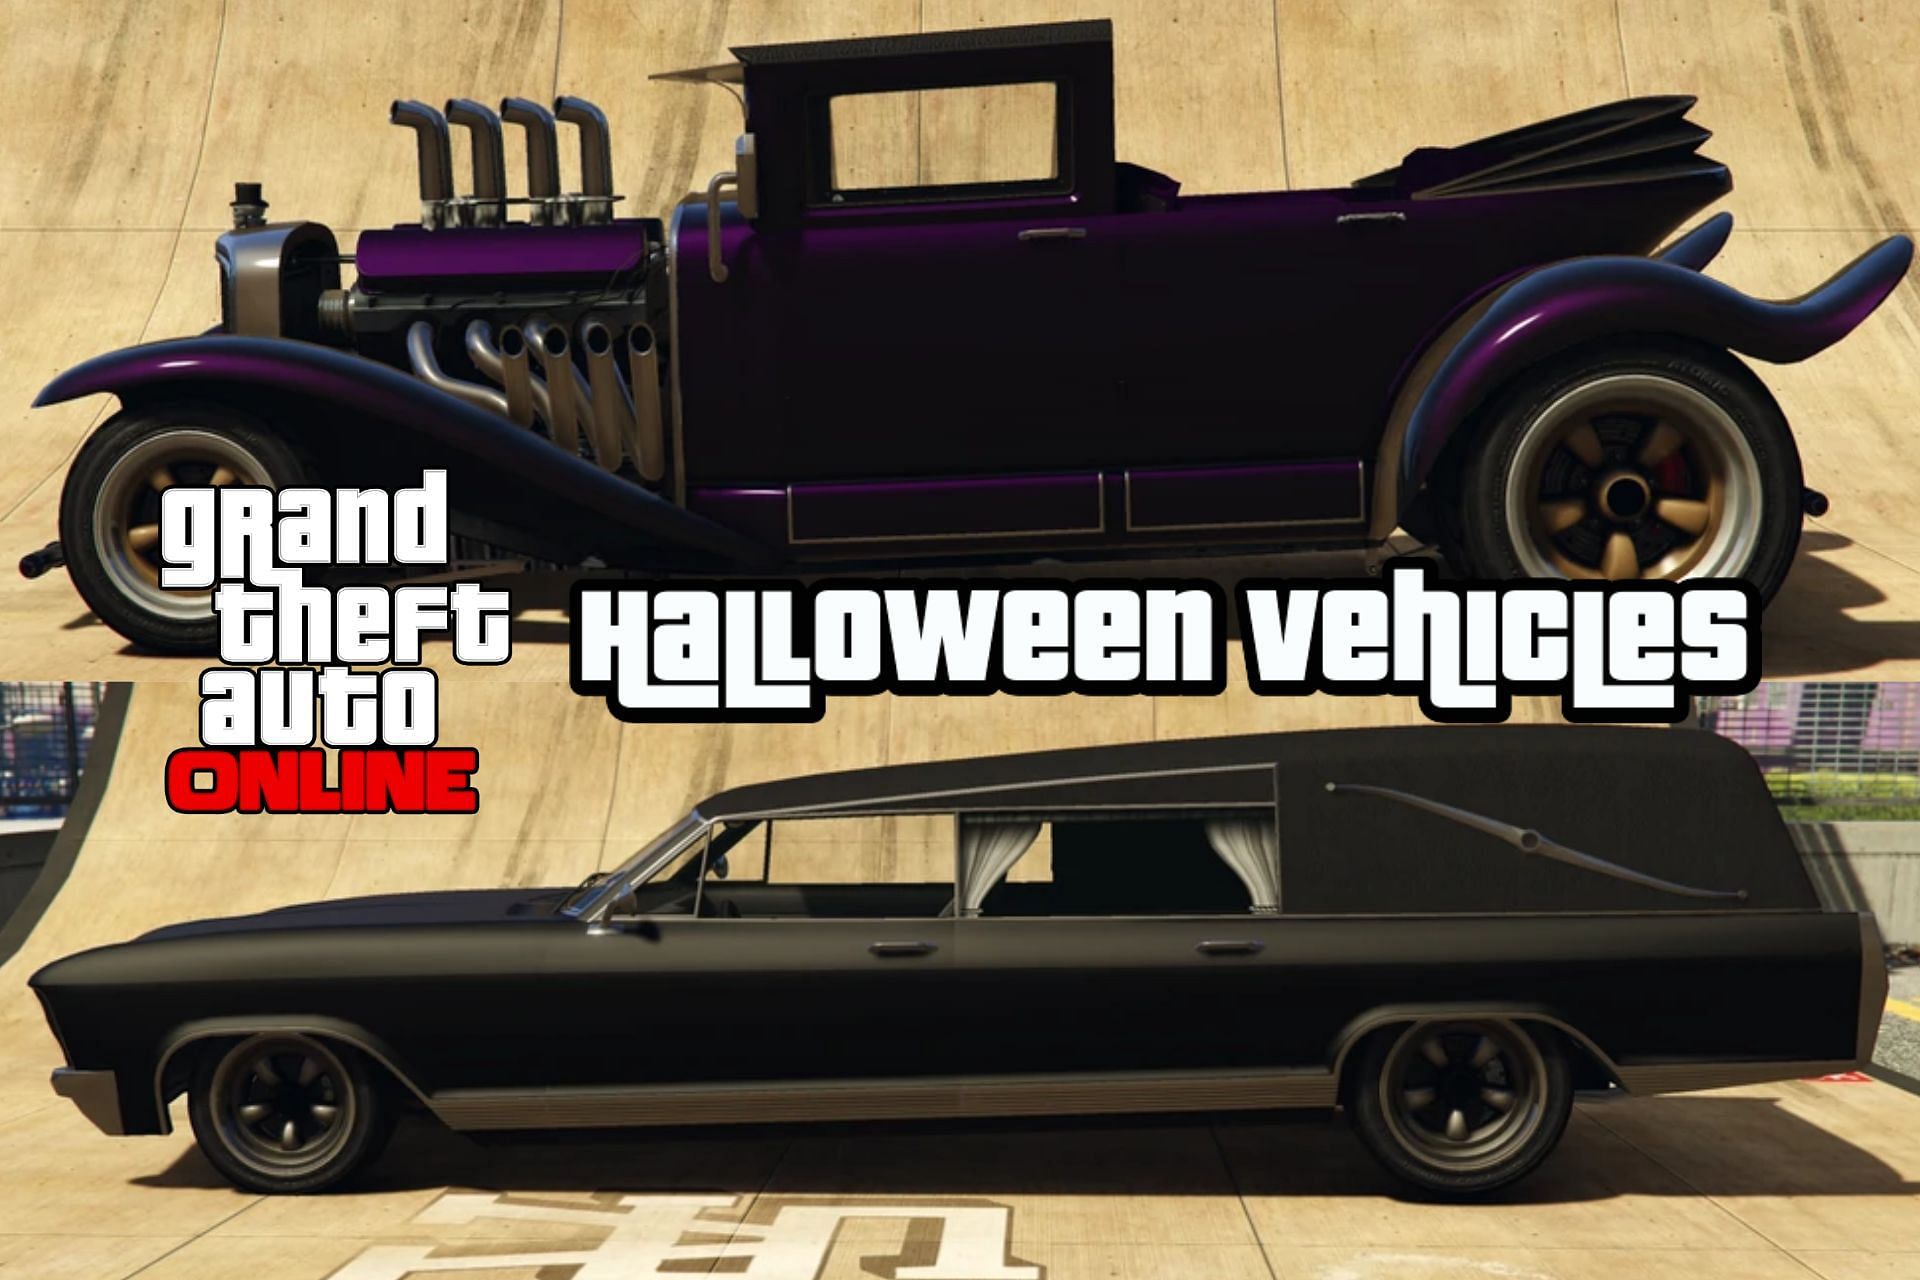 GTA Online weekly update gives you more free gifts for Halloween